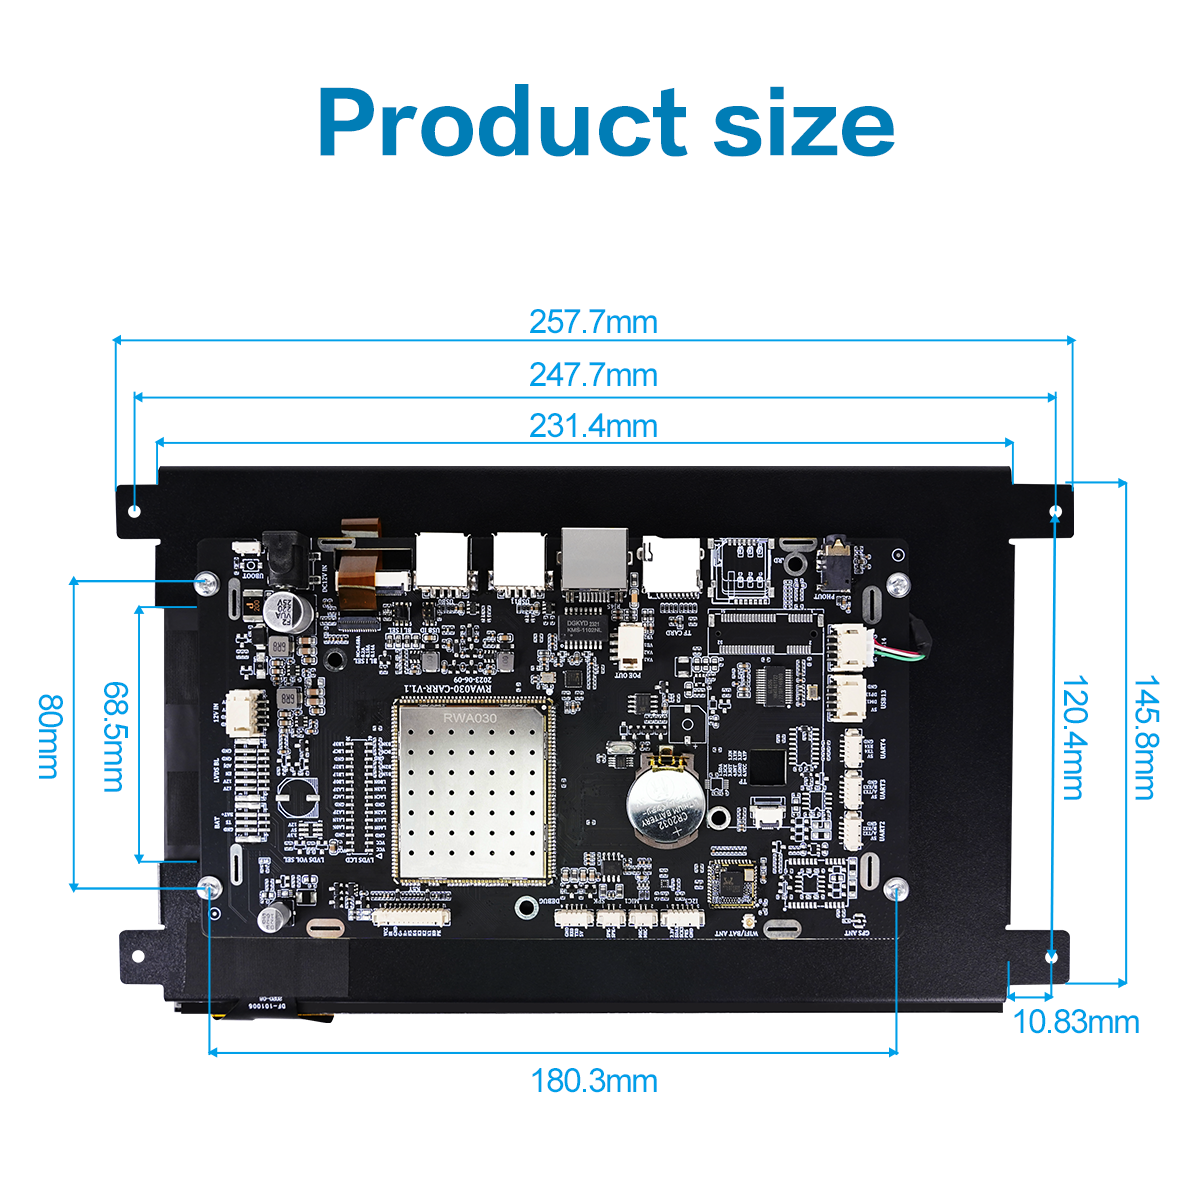 10.1 Inch Android Industrial Computer/FHD 1920*1080P Screen/Support for MIPI,LVDS,USB and Other Signals/Support for Secondary Development/Provide Source Code